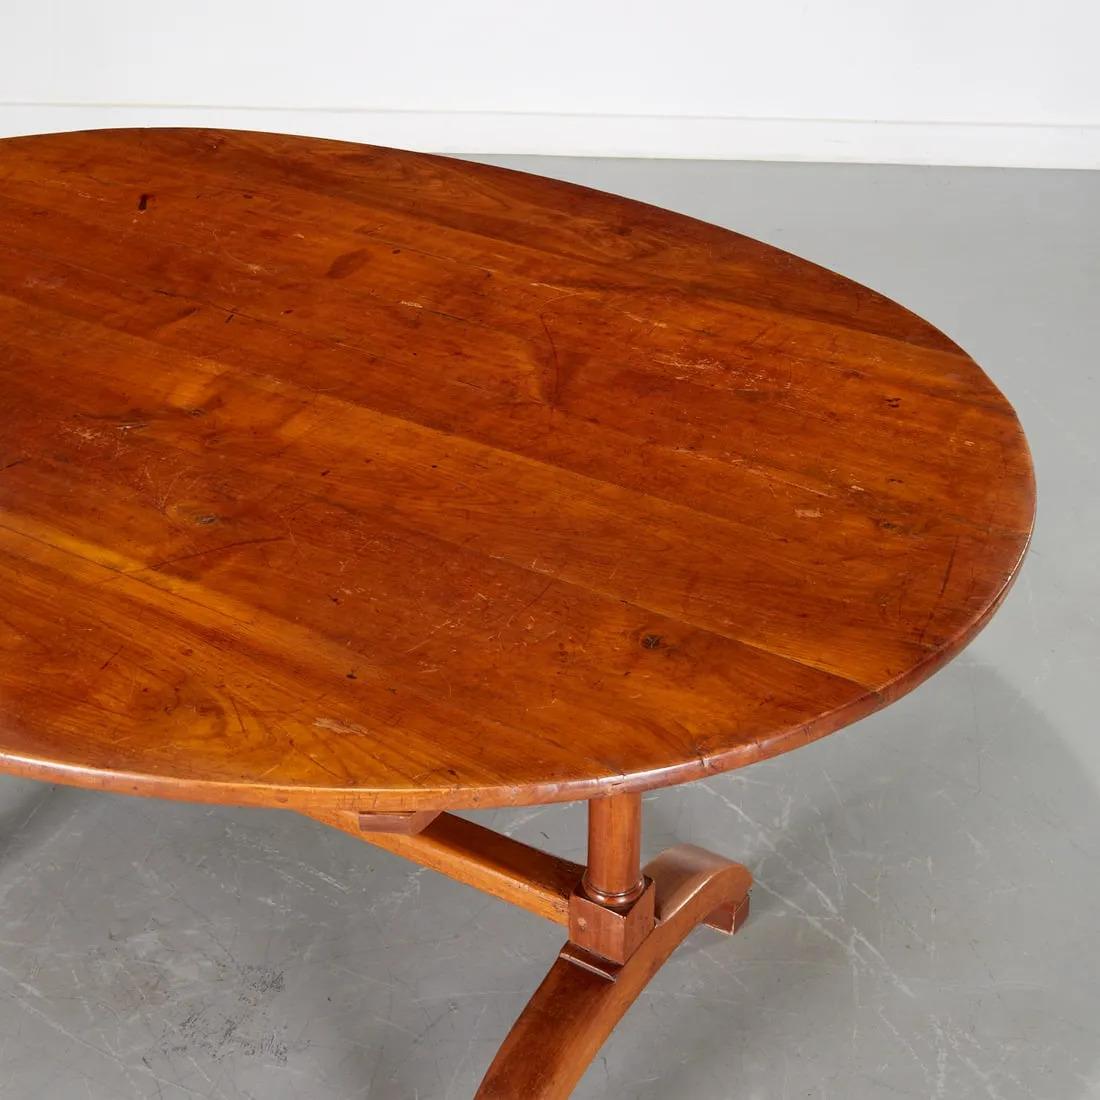 French Directoire Tilt-top Wine Tasting Table, C. 1800 In Good Condition For Sale In Doylestown, PA